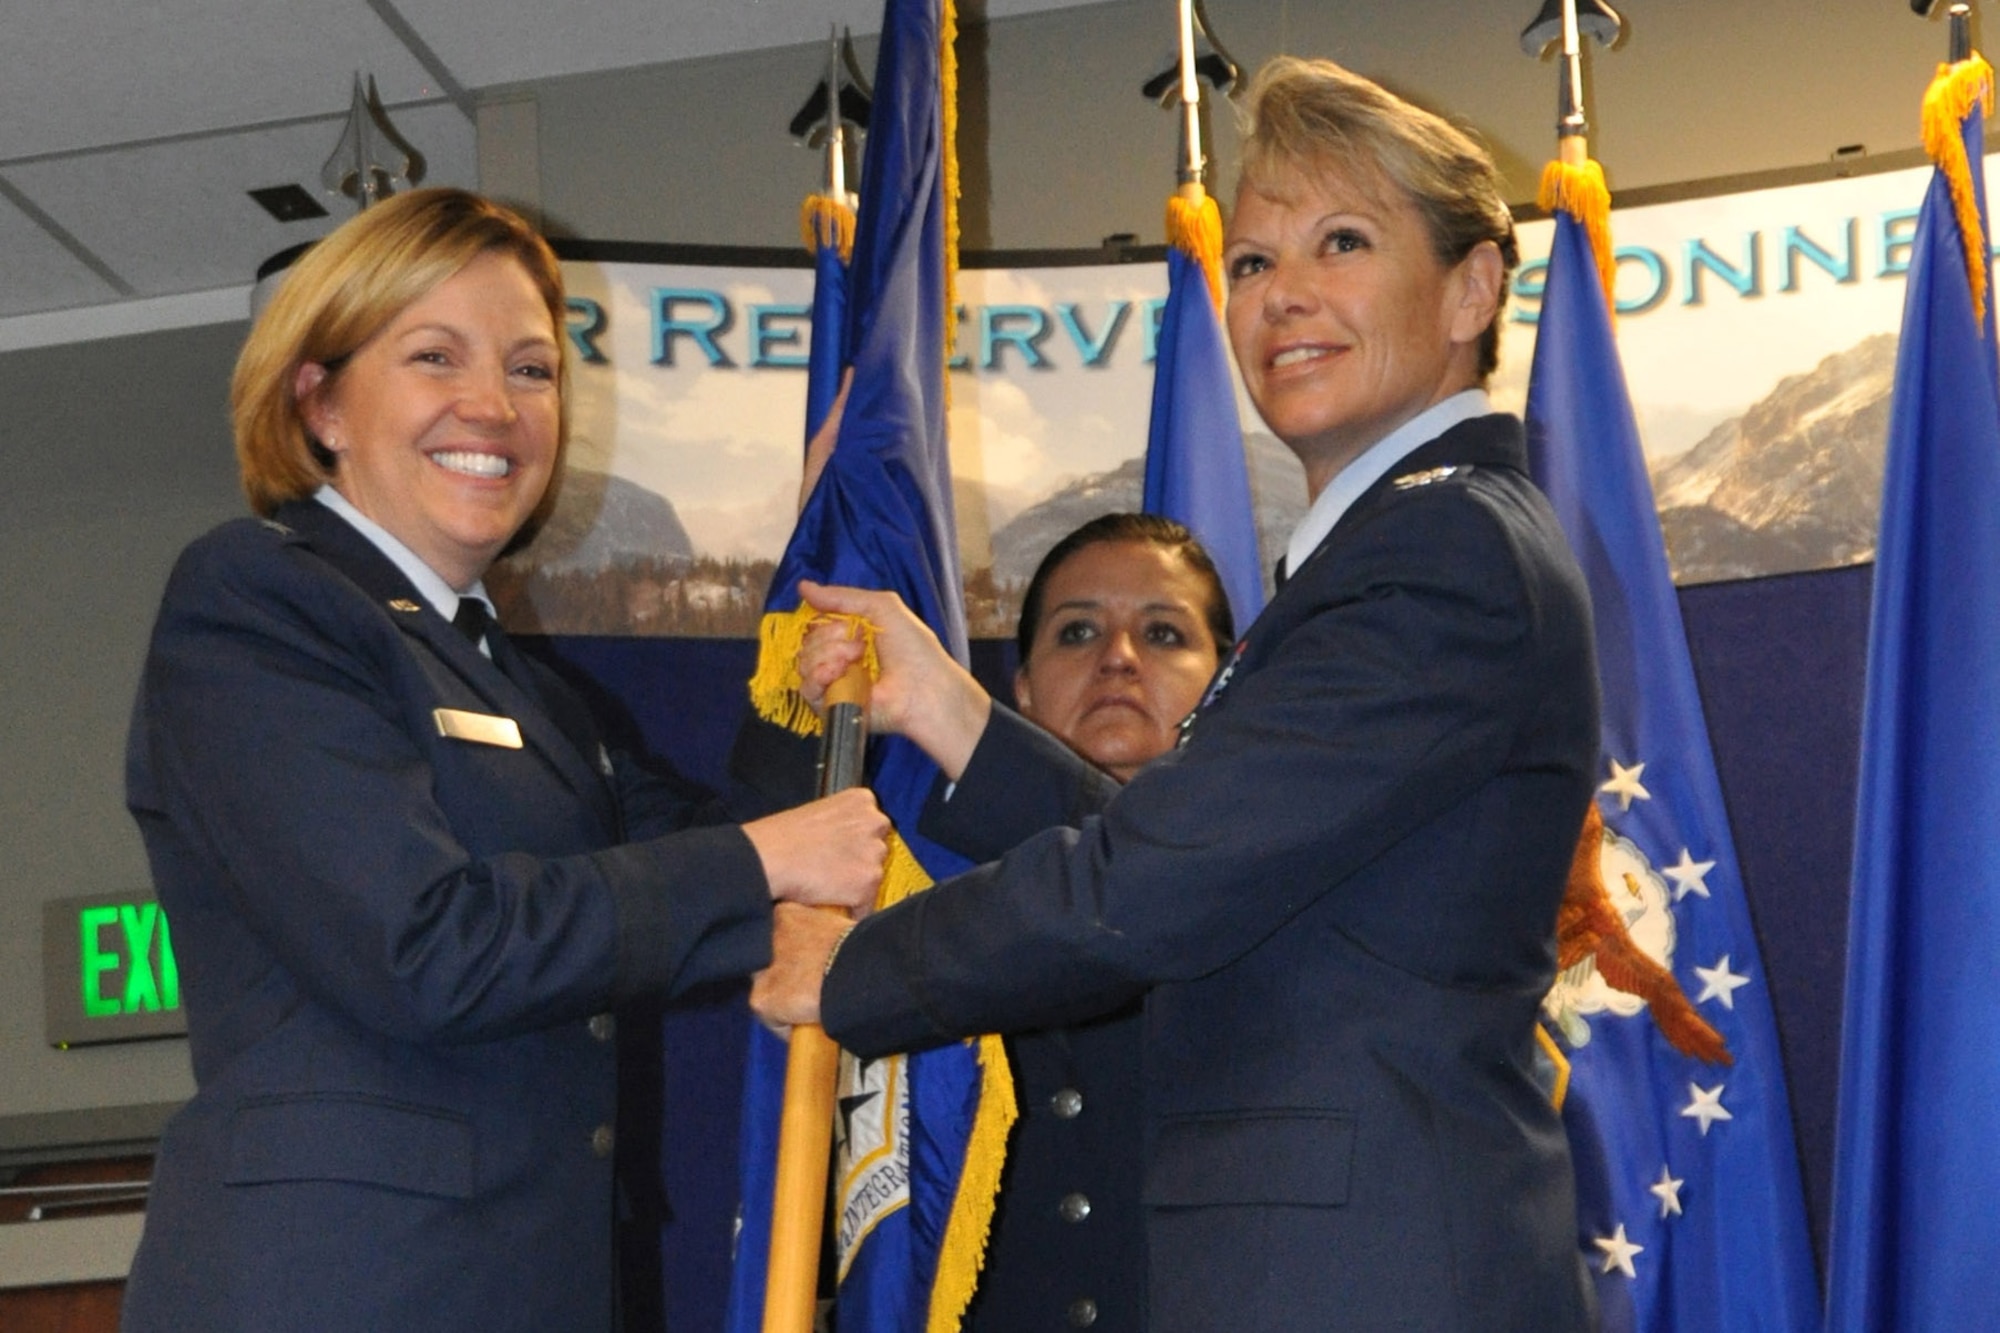 Col. Carolyn Stickell (right) relinquishes her command of the Headquarters Individual Reservist Readiness and Integration Organization, June 12. Stickell passed the HQ RIO guidon to Brig. Gen. Ellen Moore, the Headquarters Air Reserve Personnel Center Commander, who presided over the ceremony and later presented the guidon to the new HQ RIO commander, Col. Kelli B. Smiley.